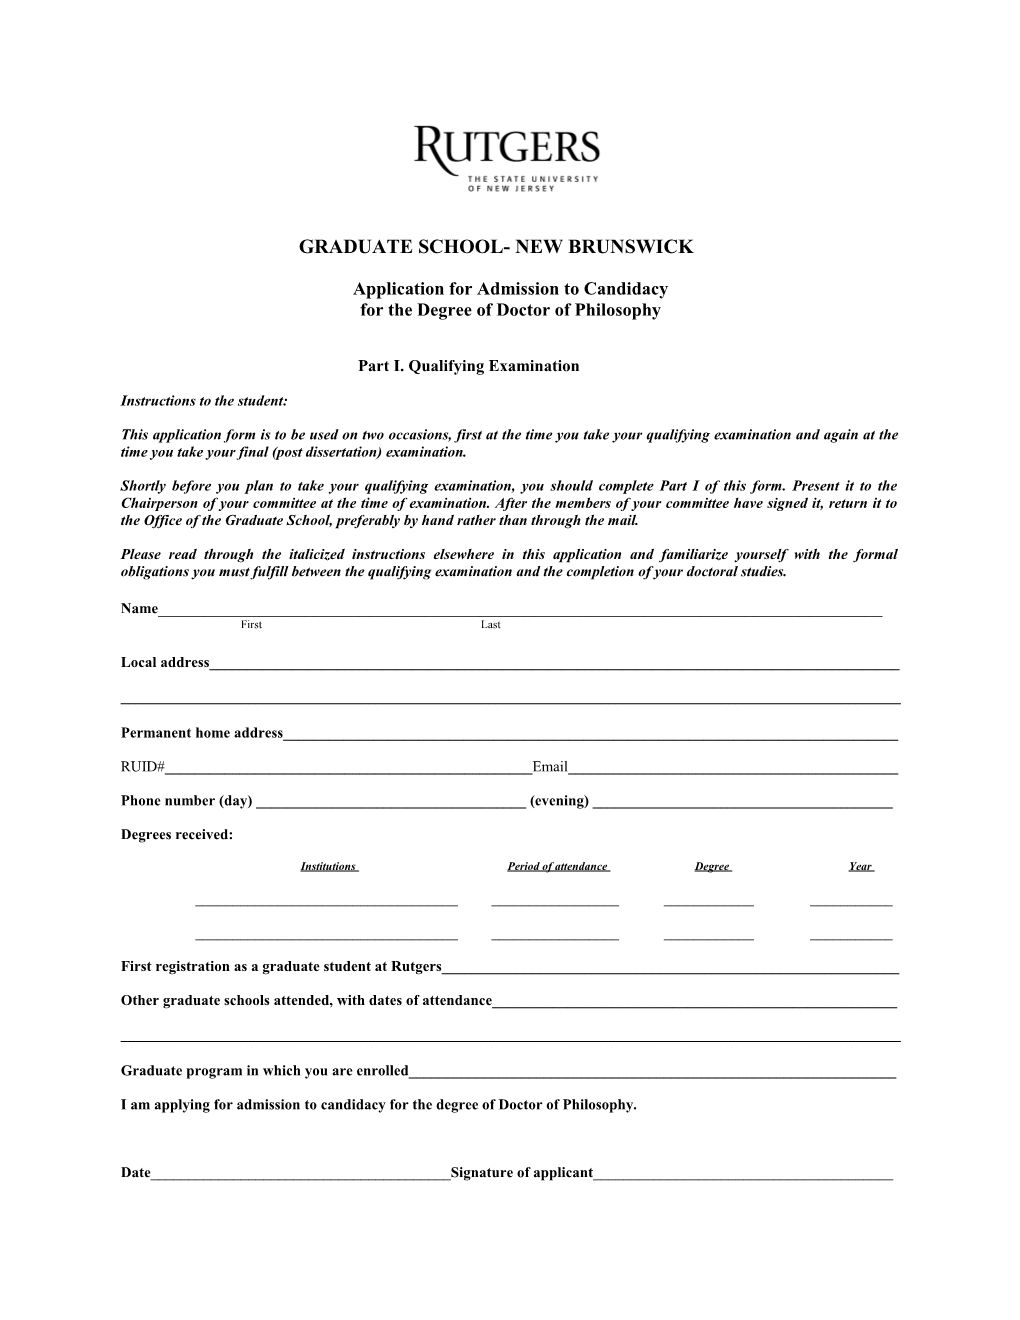 Application for Admission to Candidacy